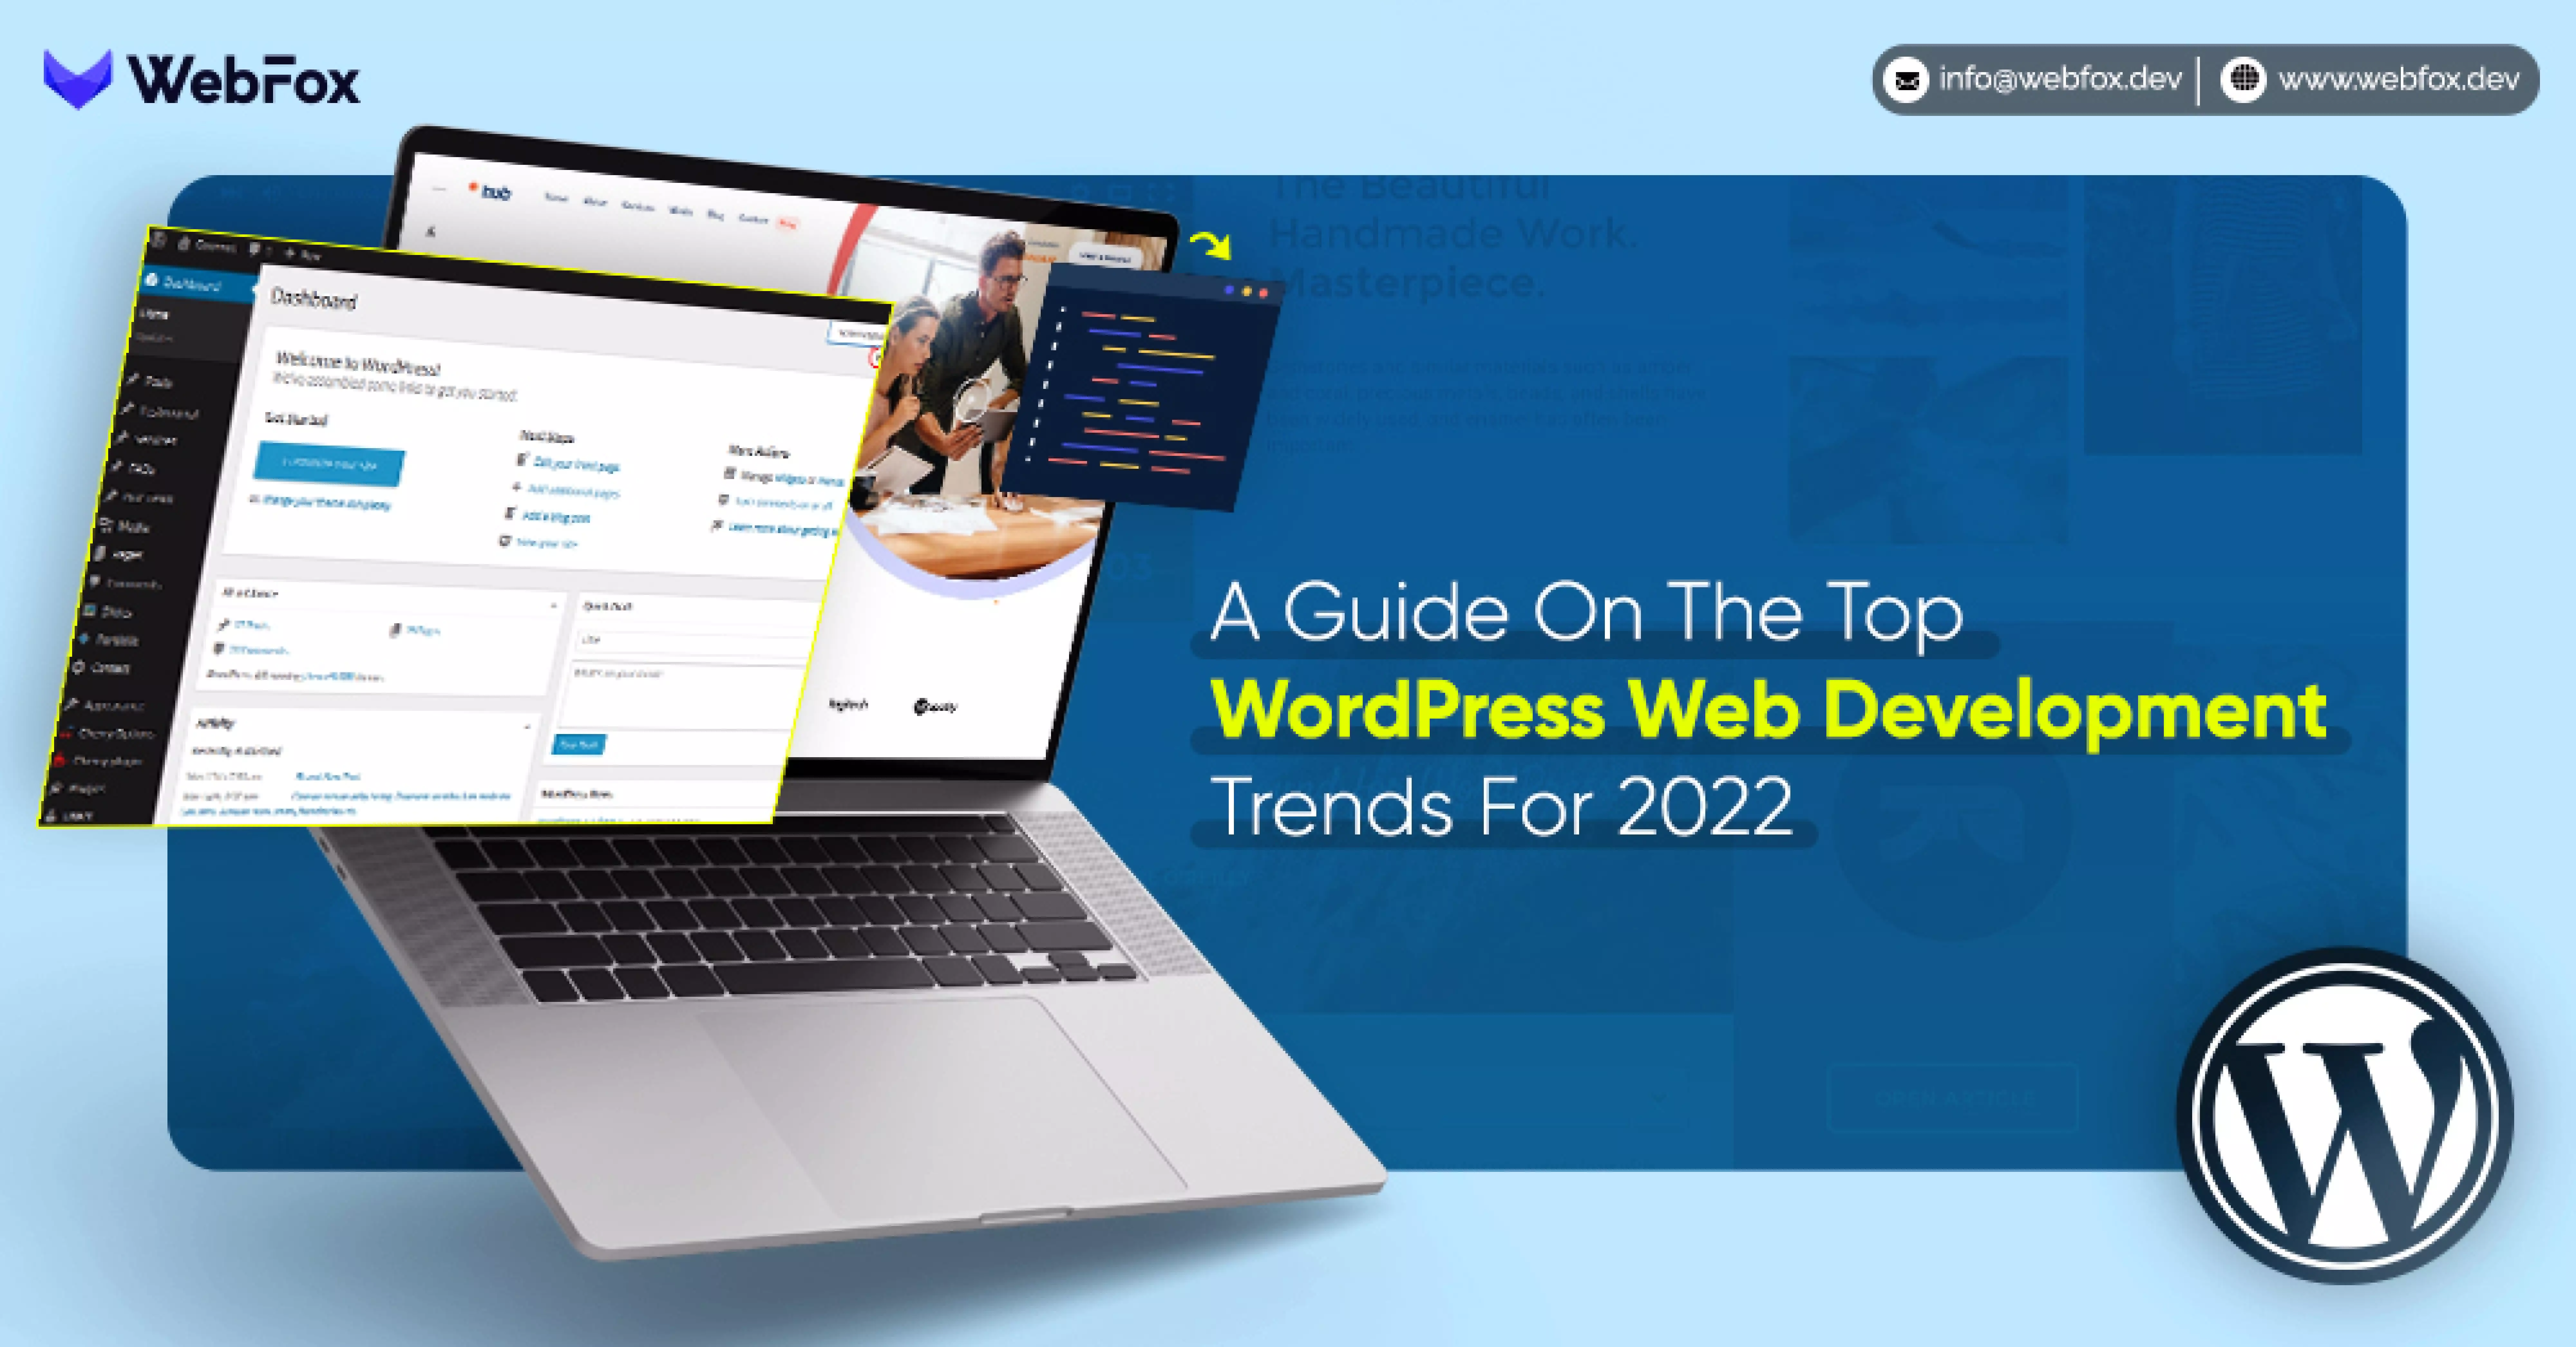 A Guide On The Top WordPress Web Development Trends For 2022